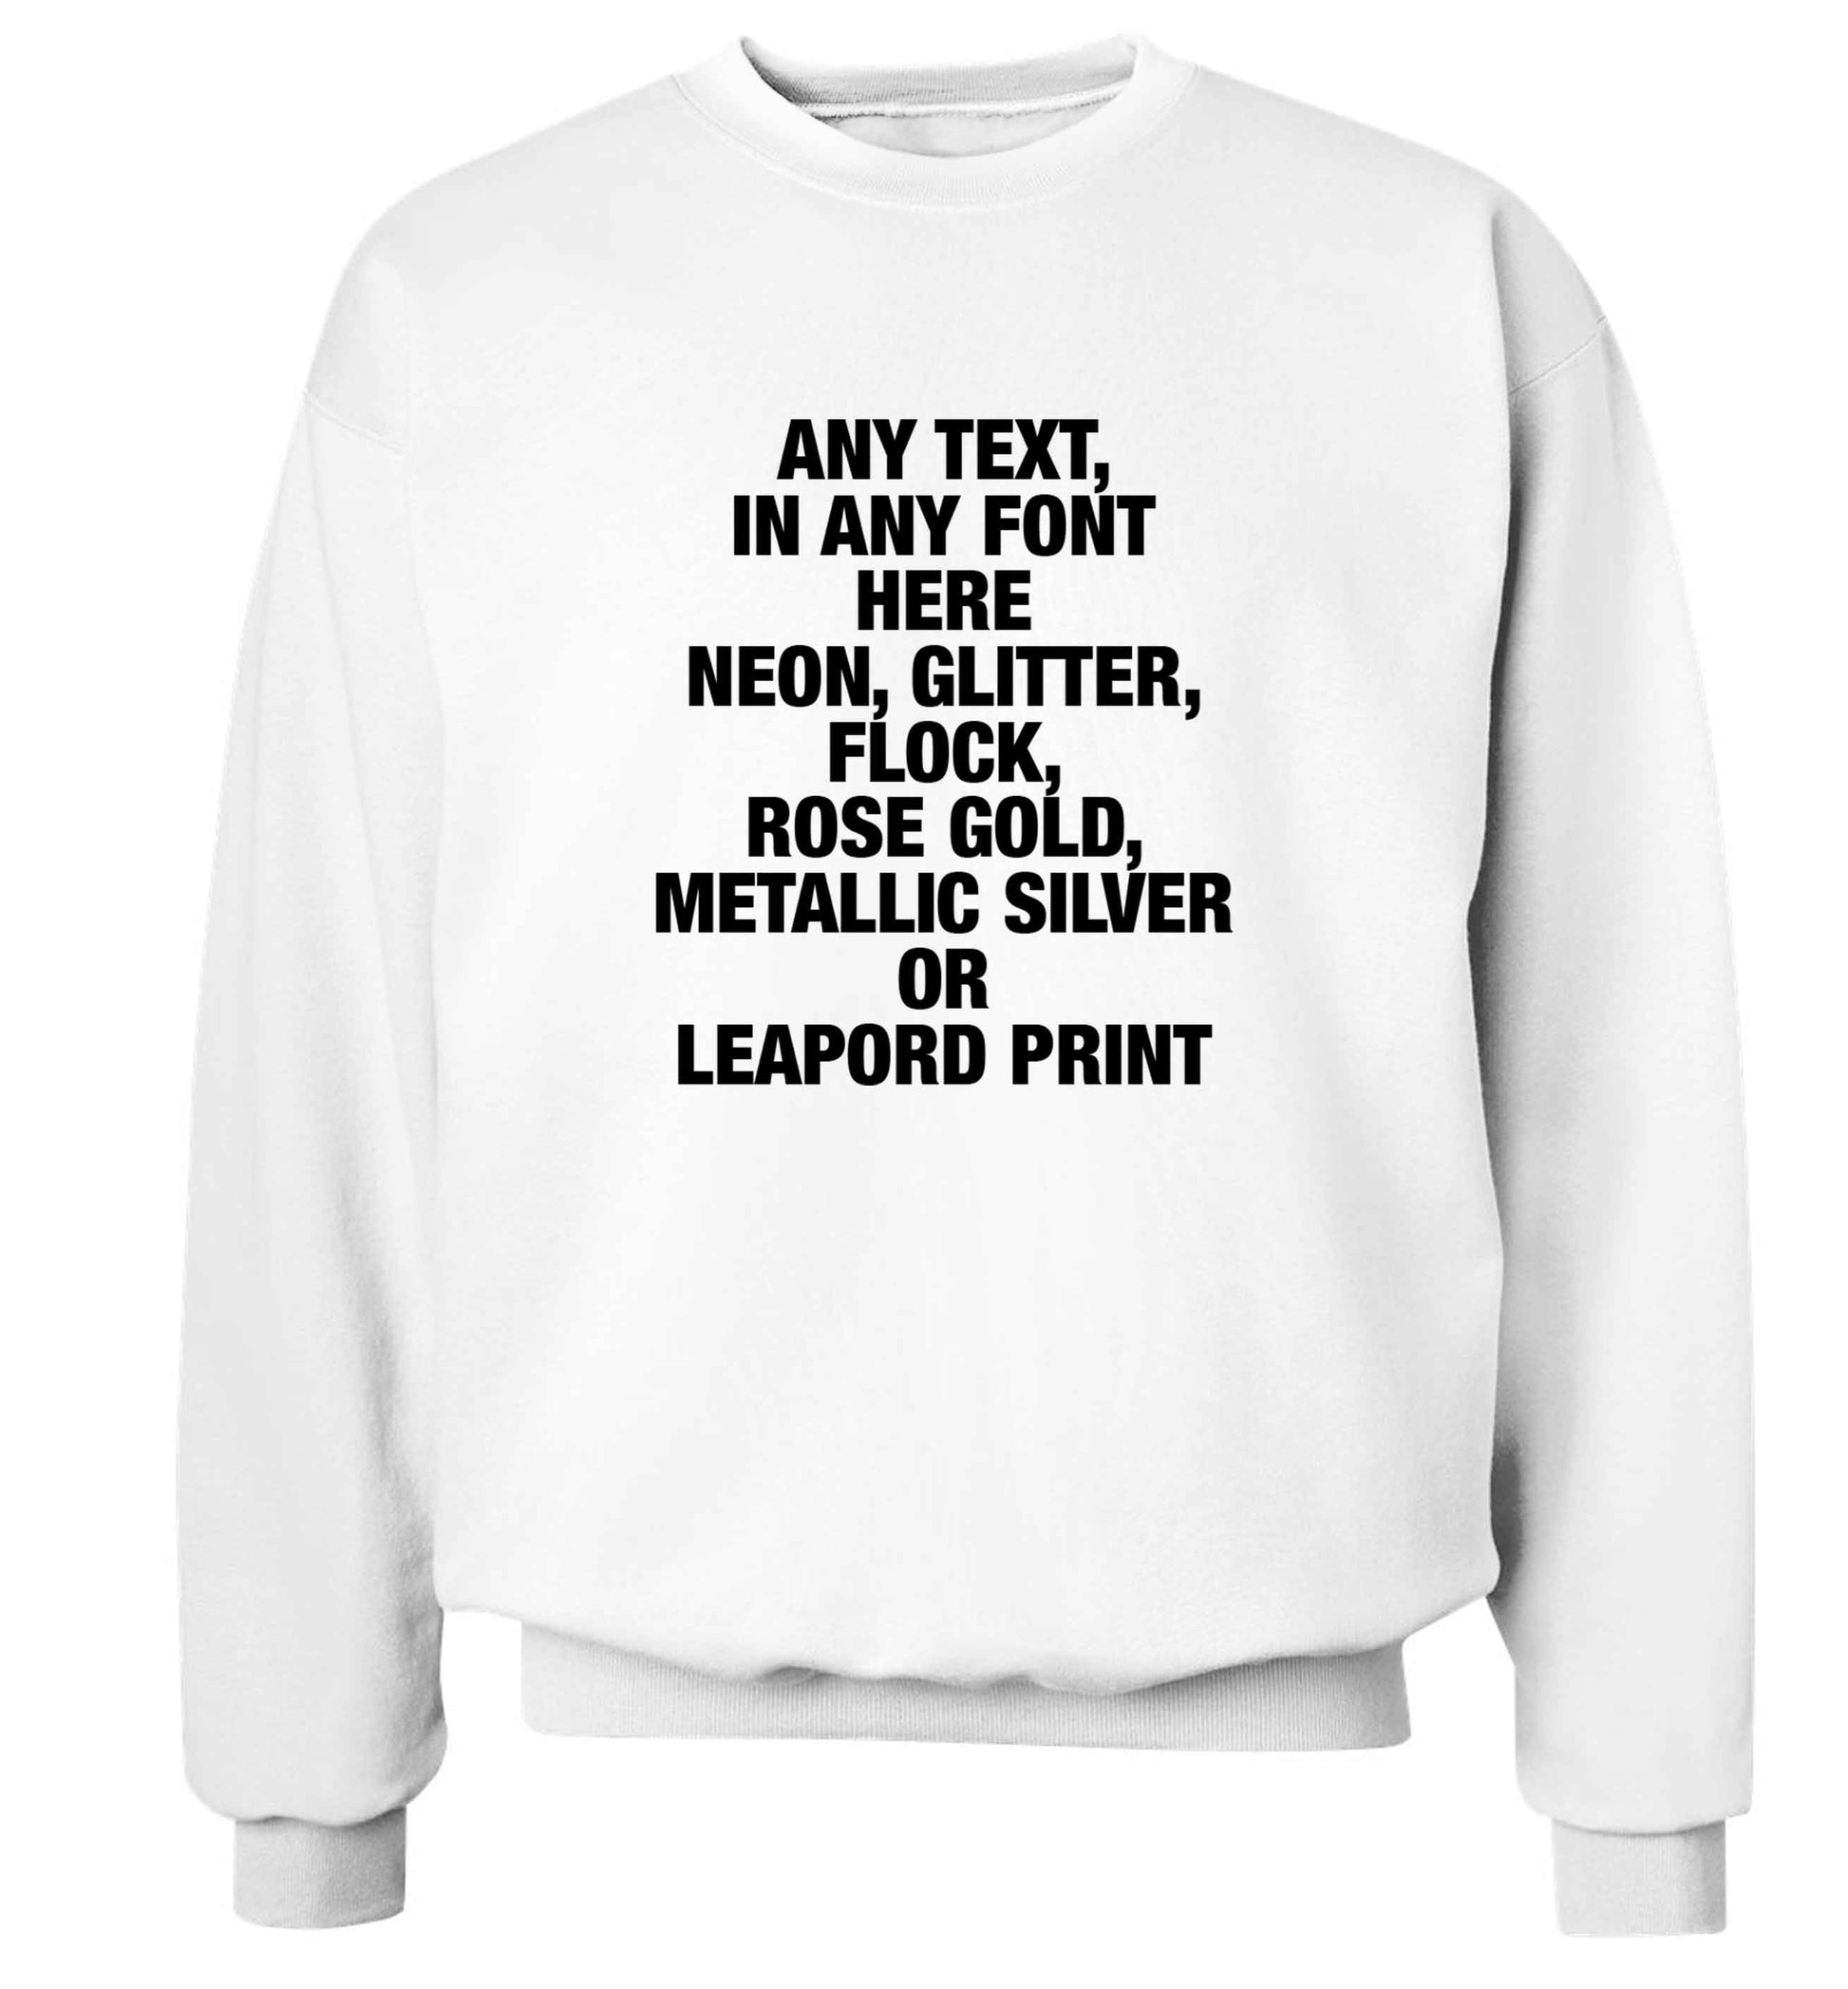 Premium custom order any text colour and font adult's unisex white sweater 2XL